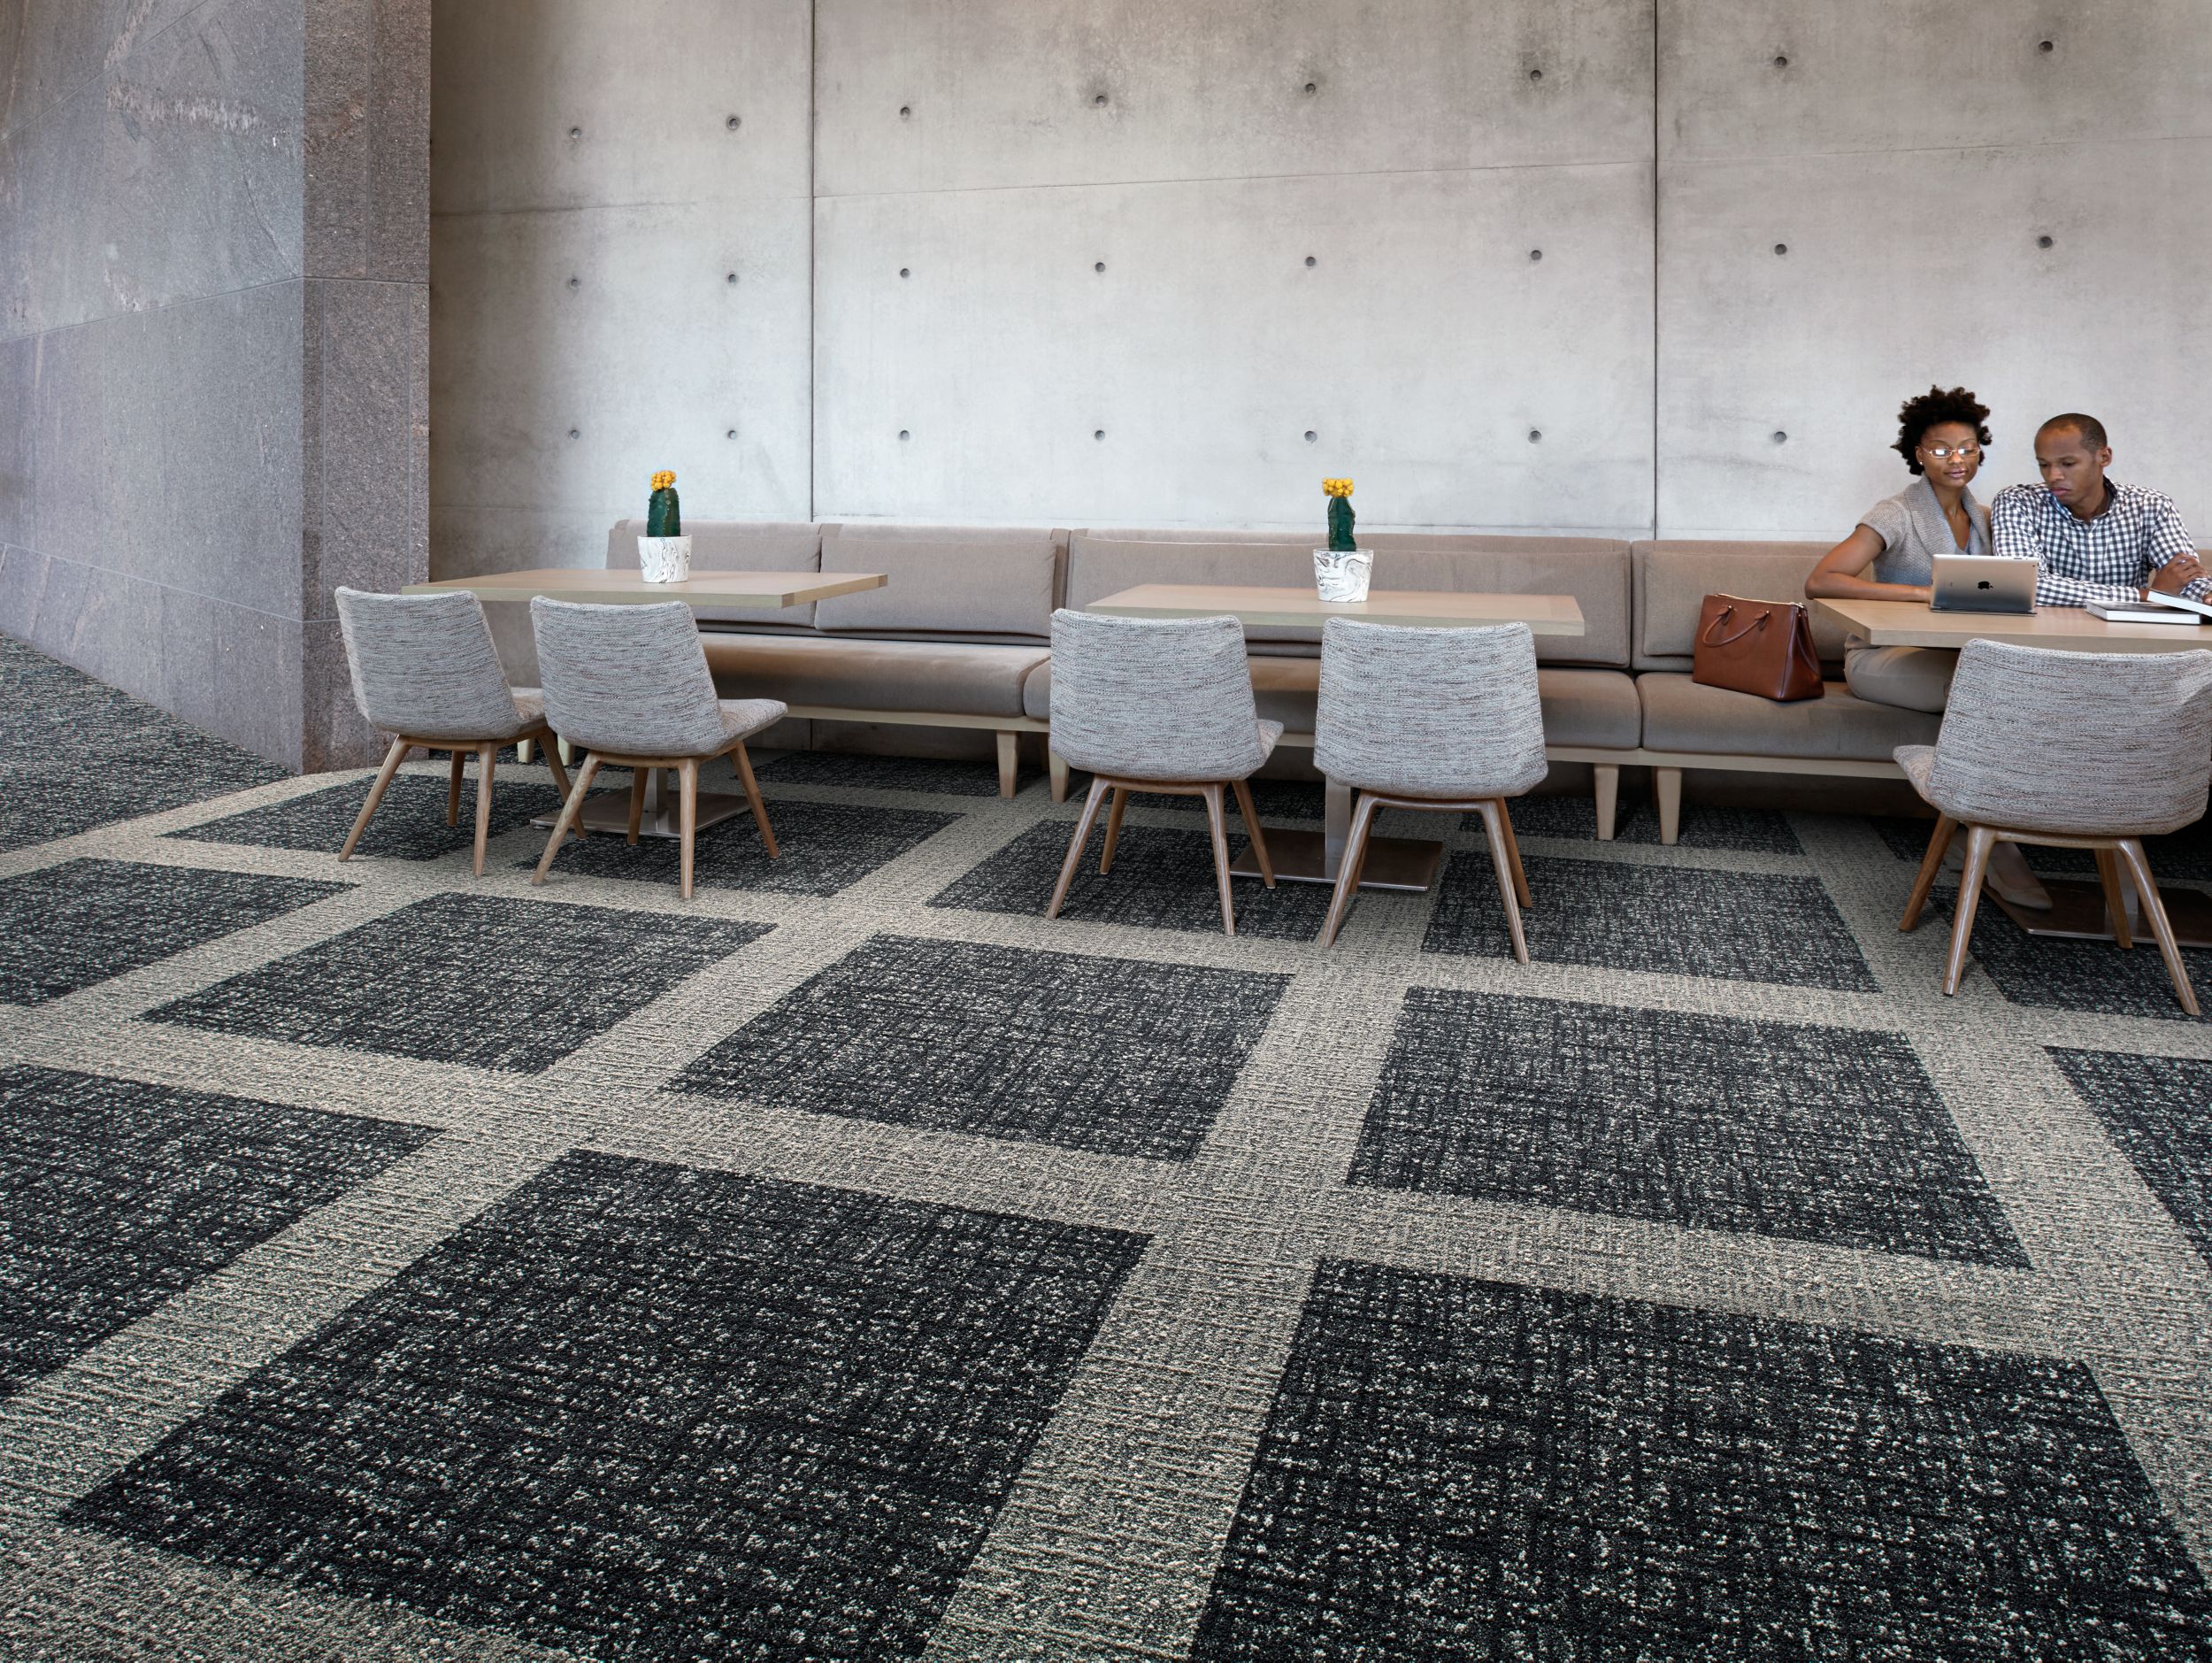 Interface WW895 plank carpet tile and Textured Woodgrains LVT in office common area with tables and chairs afbeeldingnummer 6